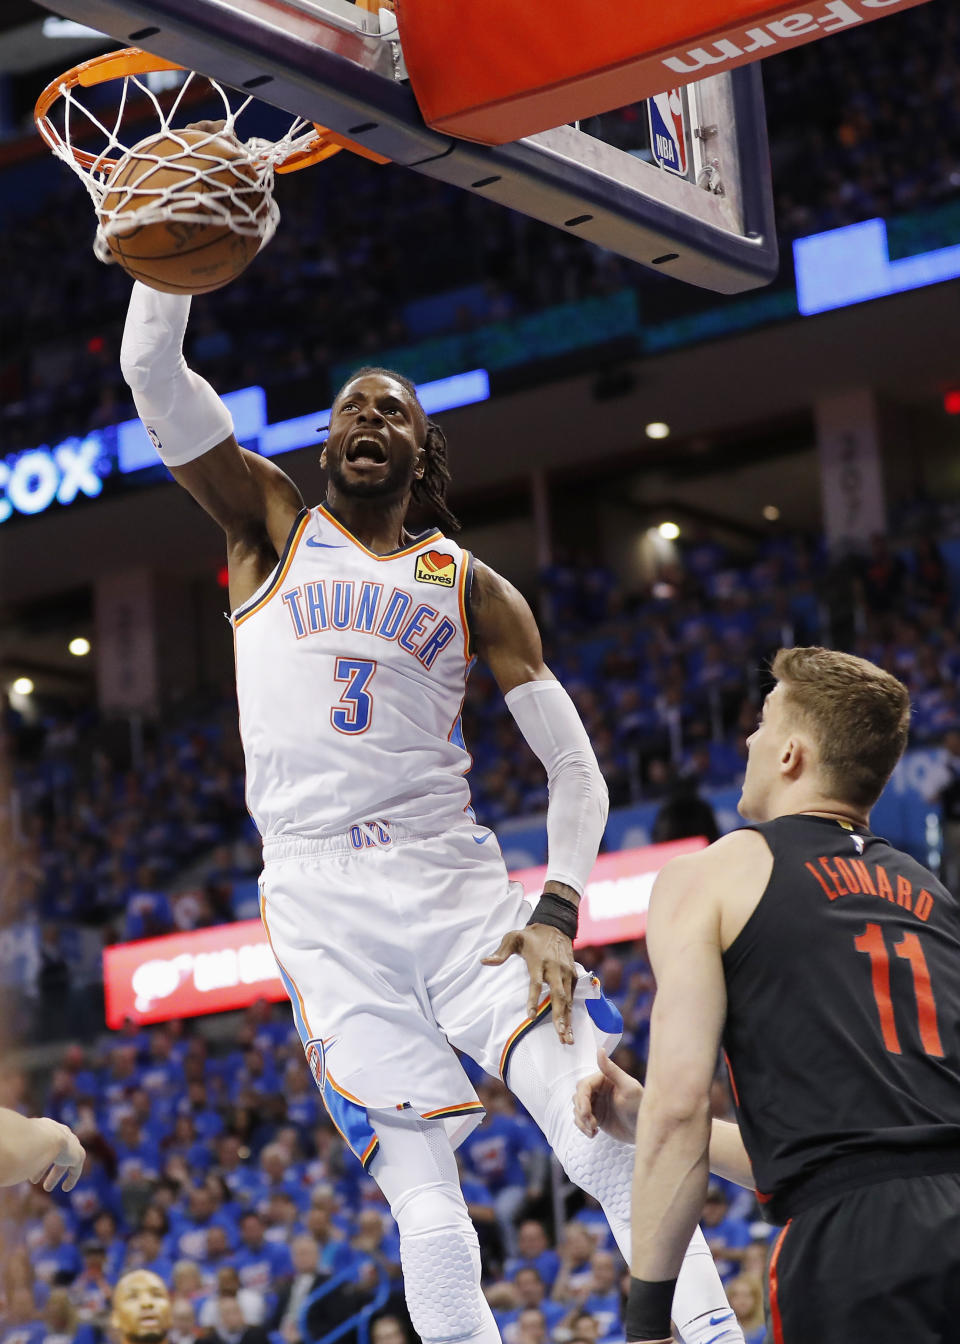 Oklahoma City Thunder forward Nerlens Noel (3) dunks as Portland Trail Blazers forward Meyers Leonard (11) looks on in the first half of Game 4 of an NBA basketball first-round playoff series Sunday, April 21, 2019, in Oklahoma City. (AP Photo/Alonzo Adams)